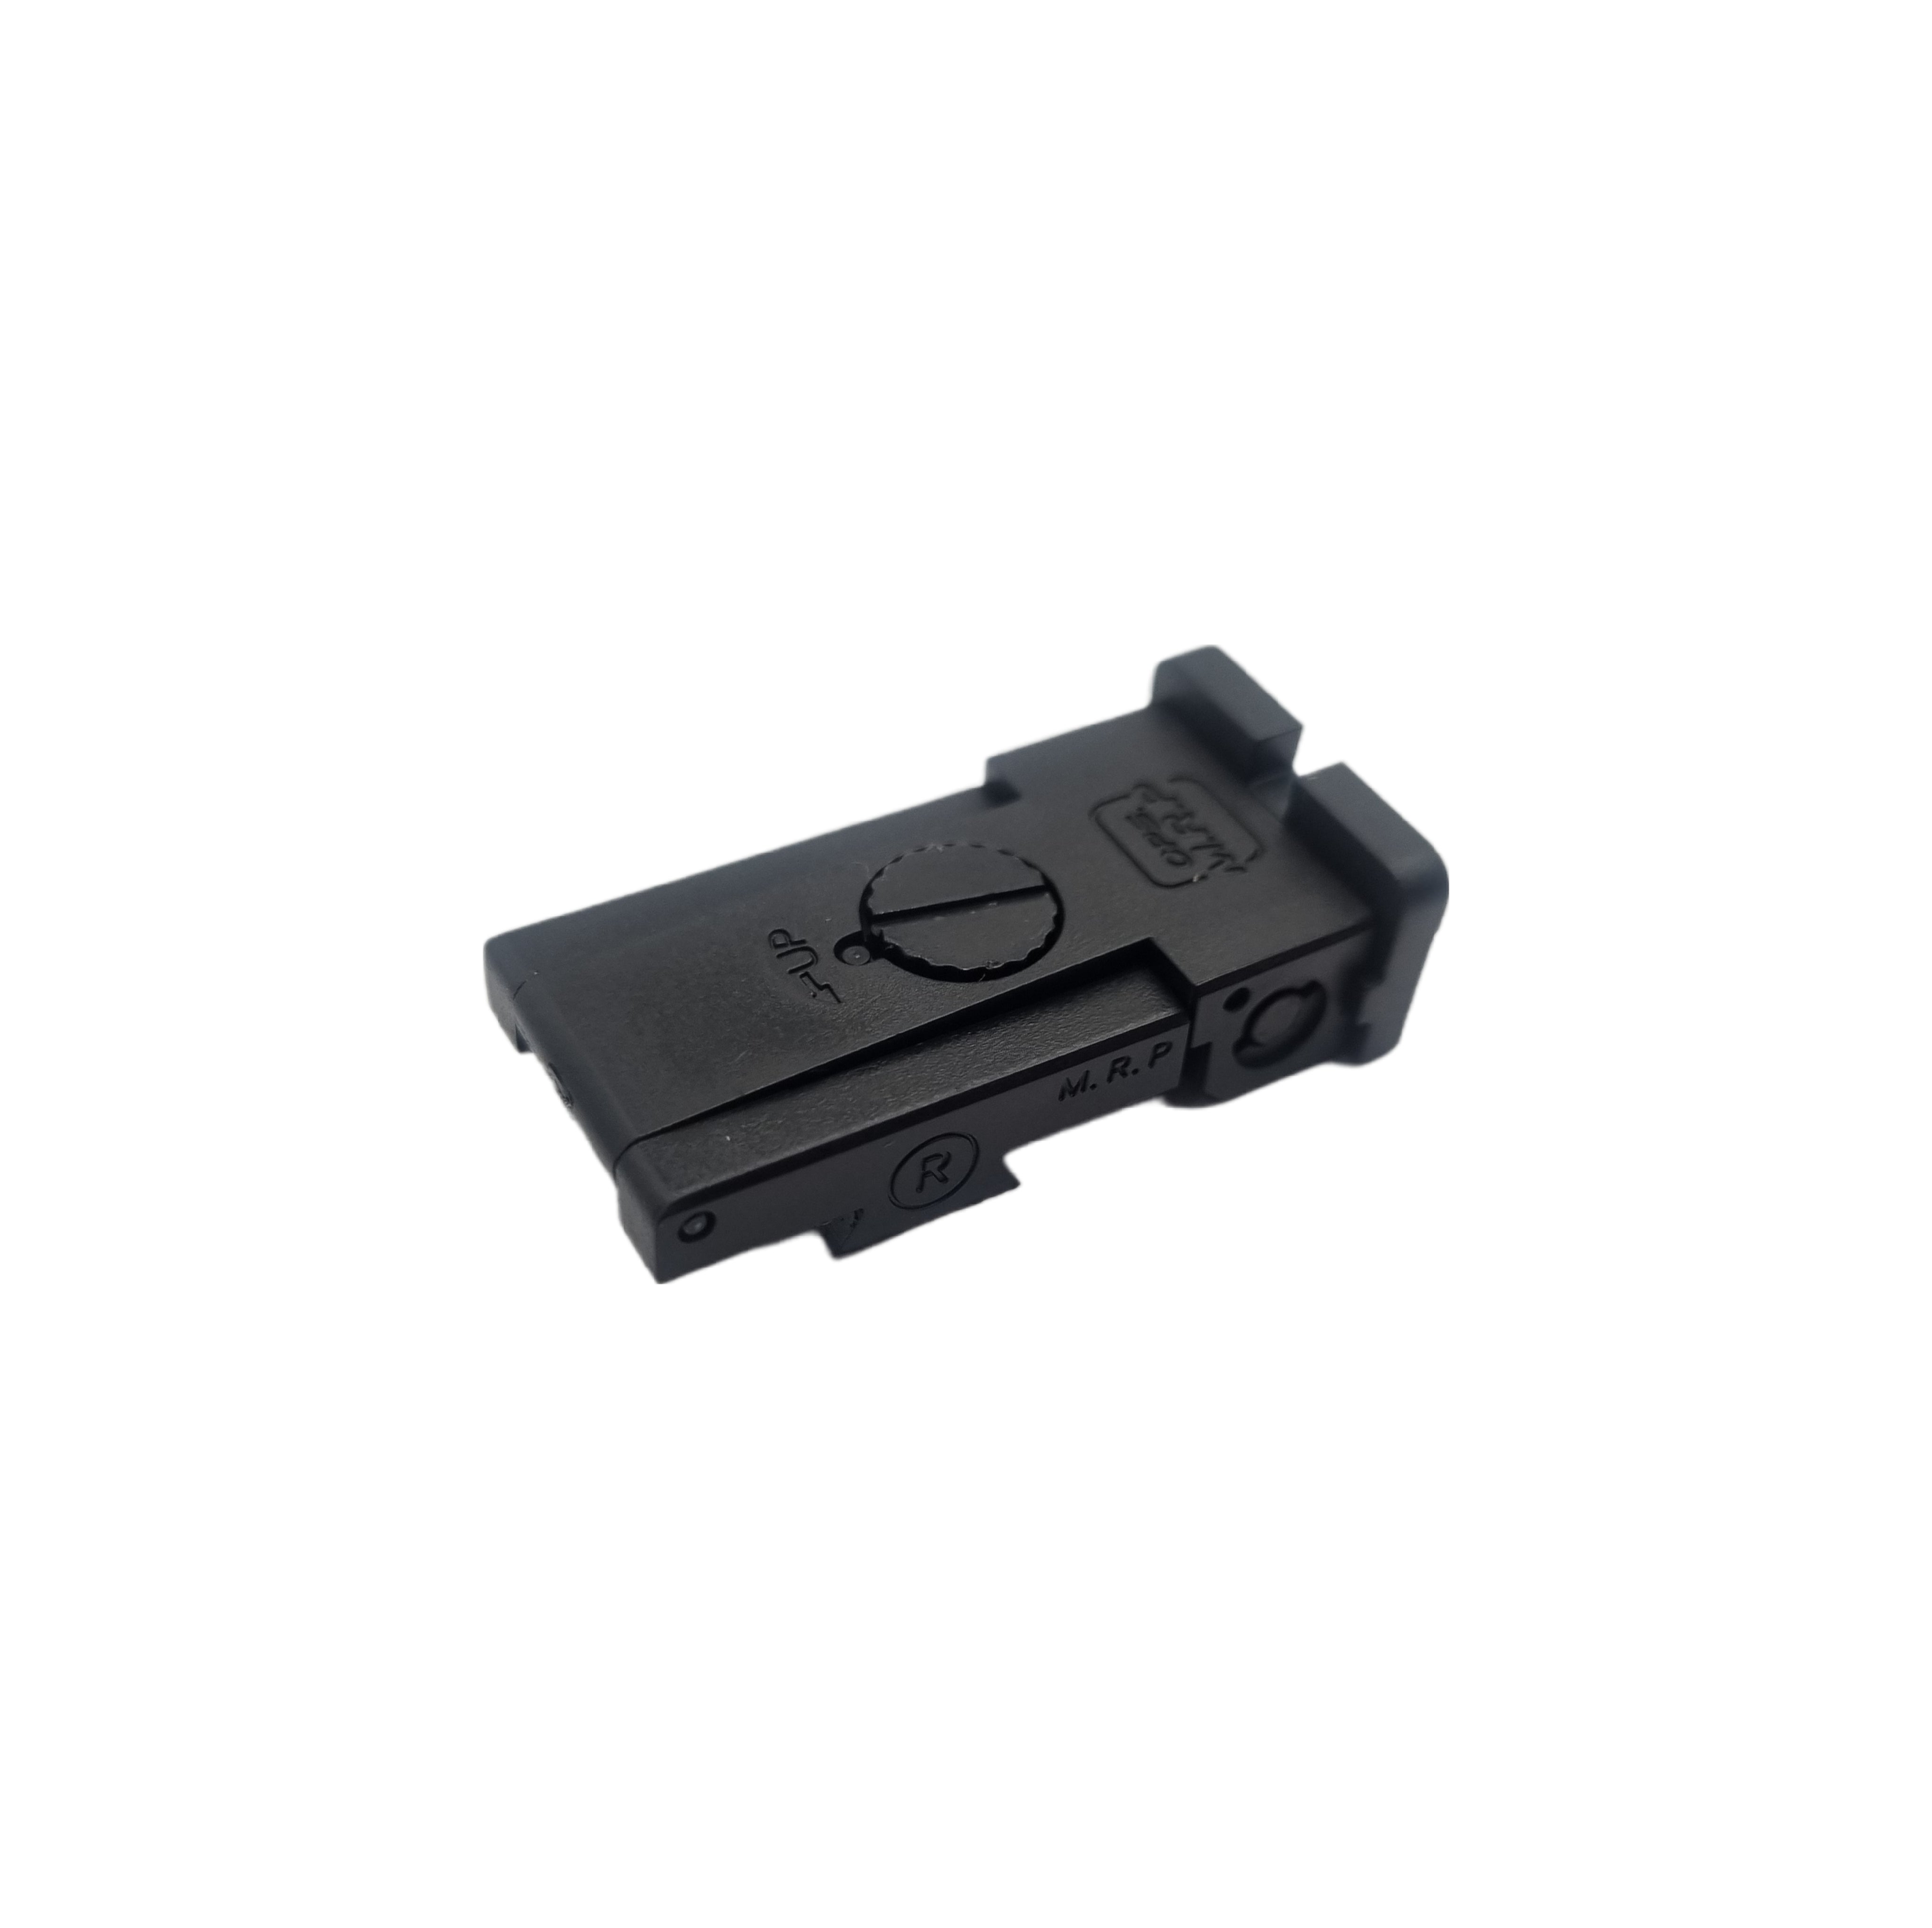 Tokyo Marui Hi-Capa 5.1 - Replacement Part 51R-3 to 51R-11- Rear Sight Group (Plastic)